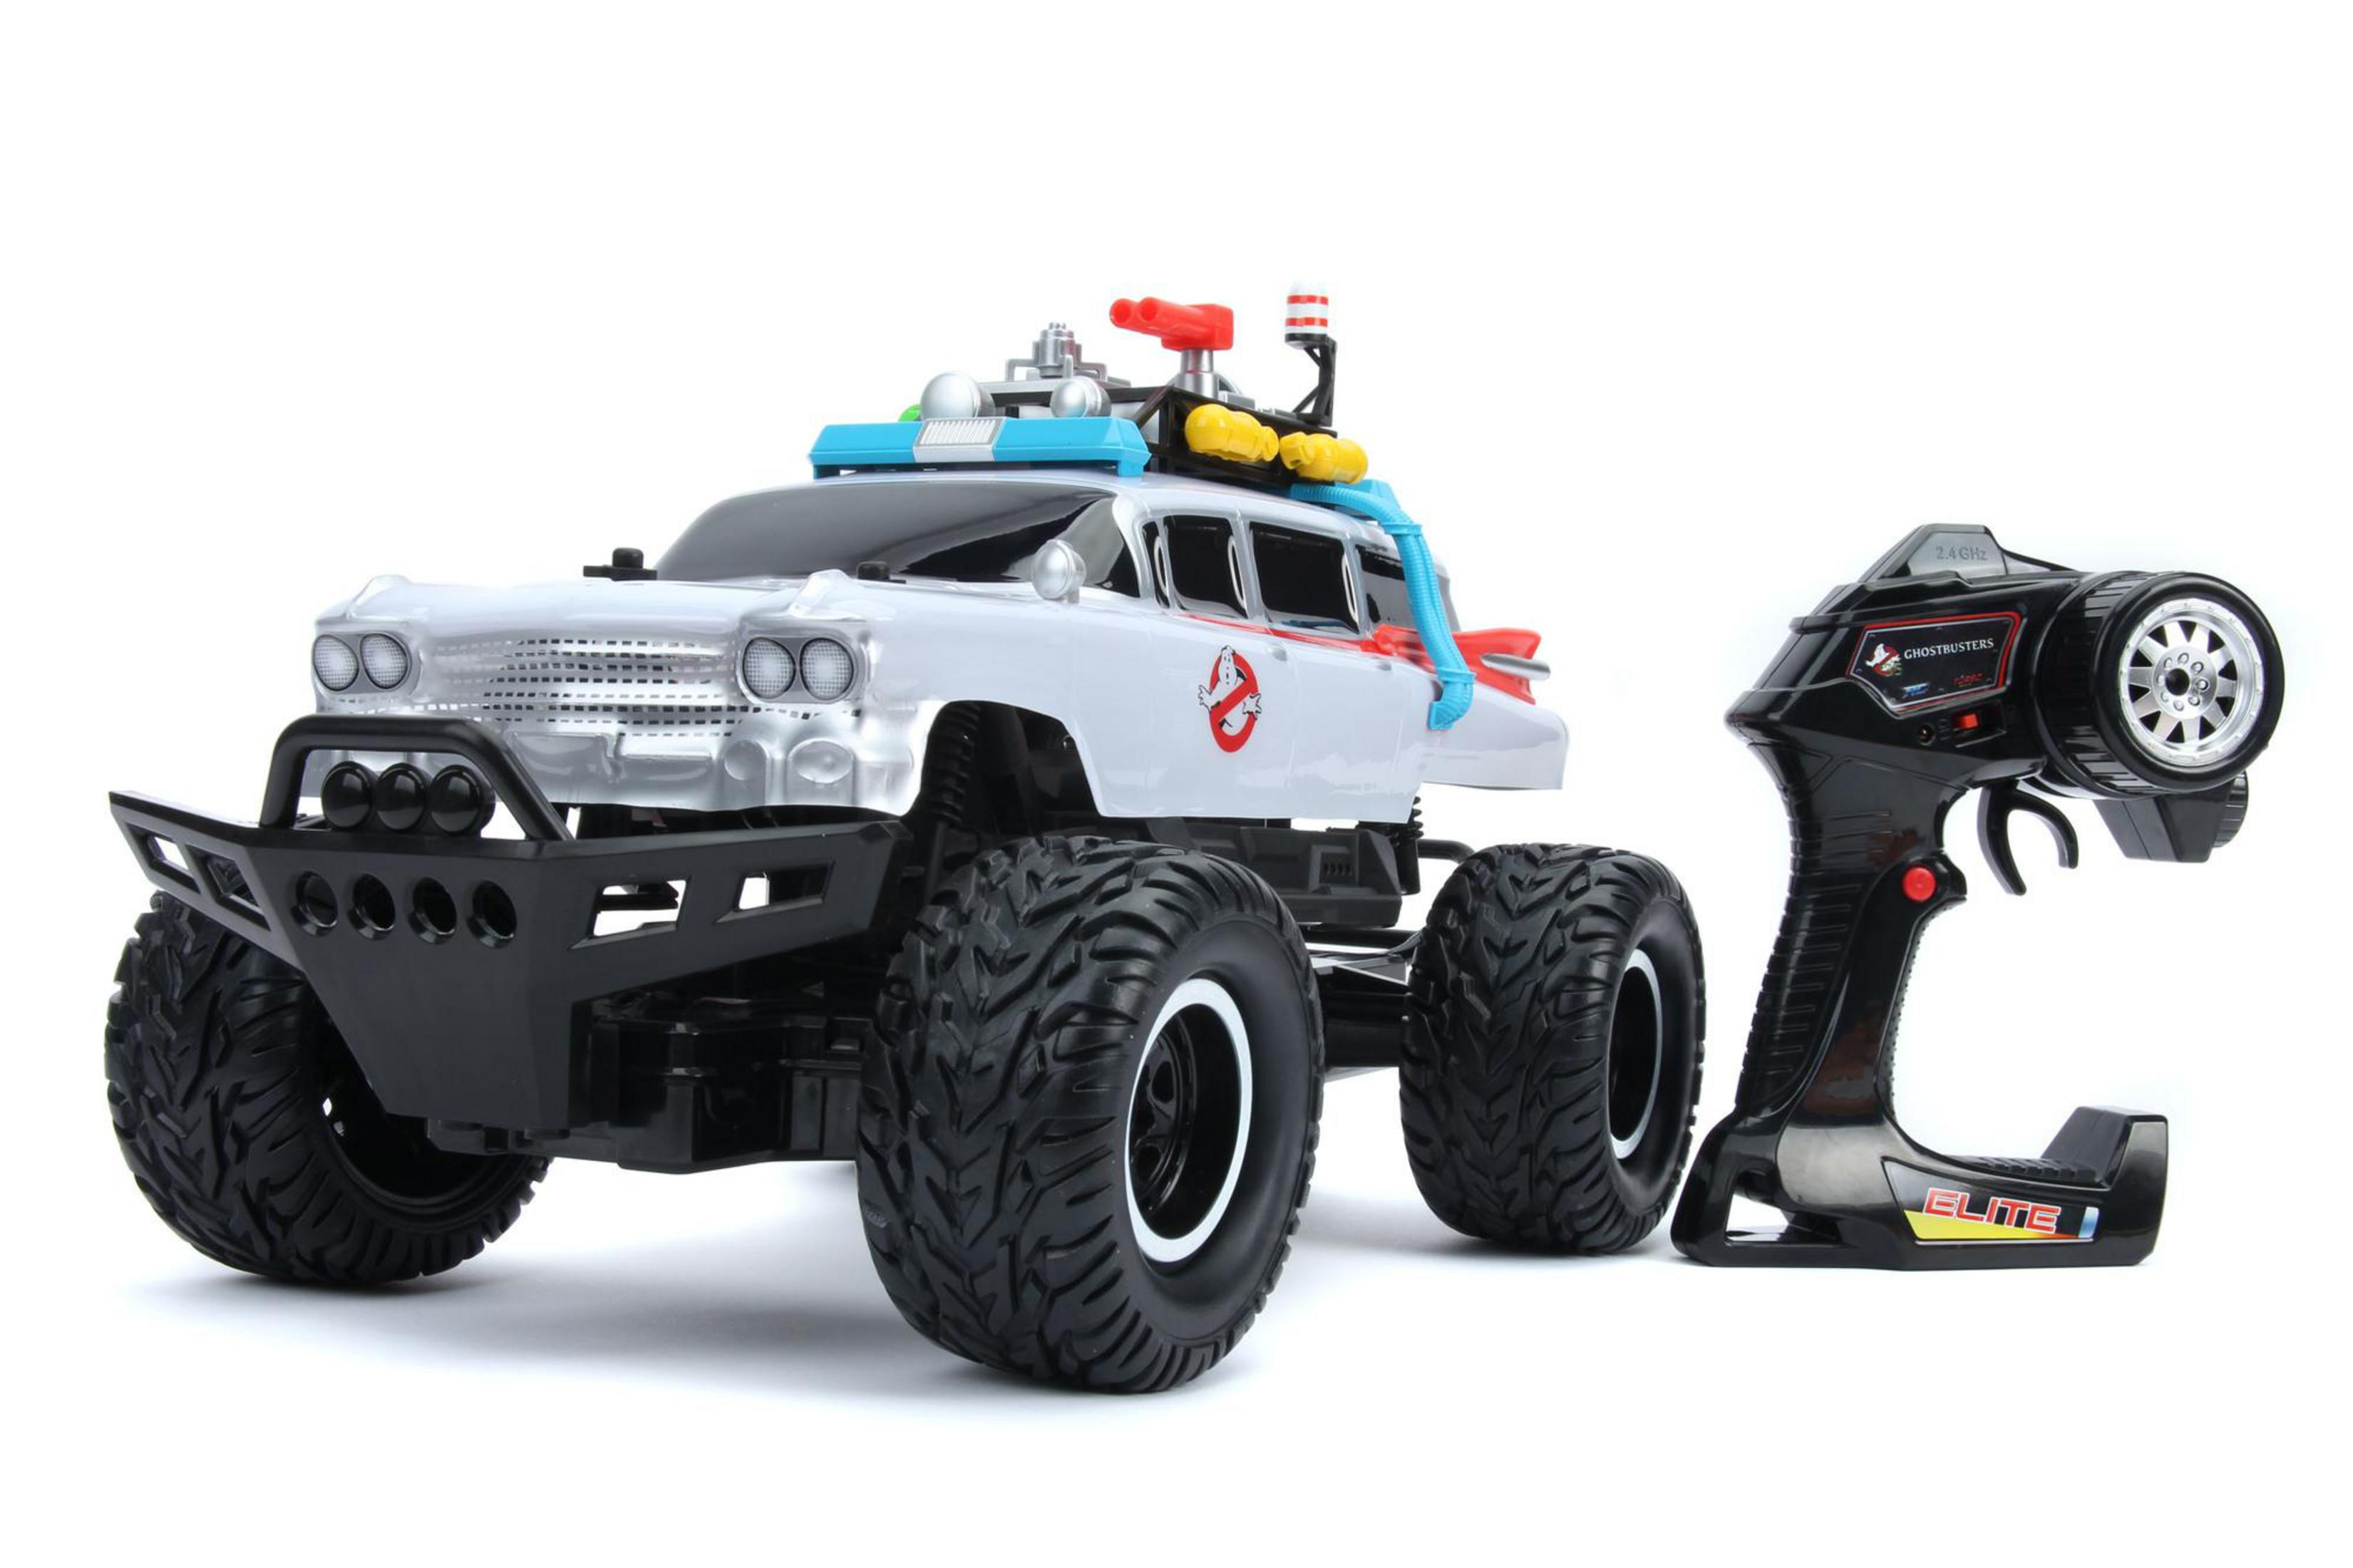 GHOSTBUSTERS TOYS Spielzeugauto, 253239000 R/C DICKIE OFFROAD Mehrfarbig RC